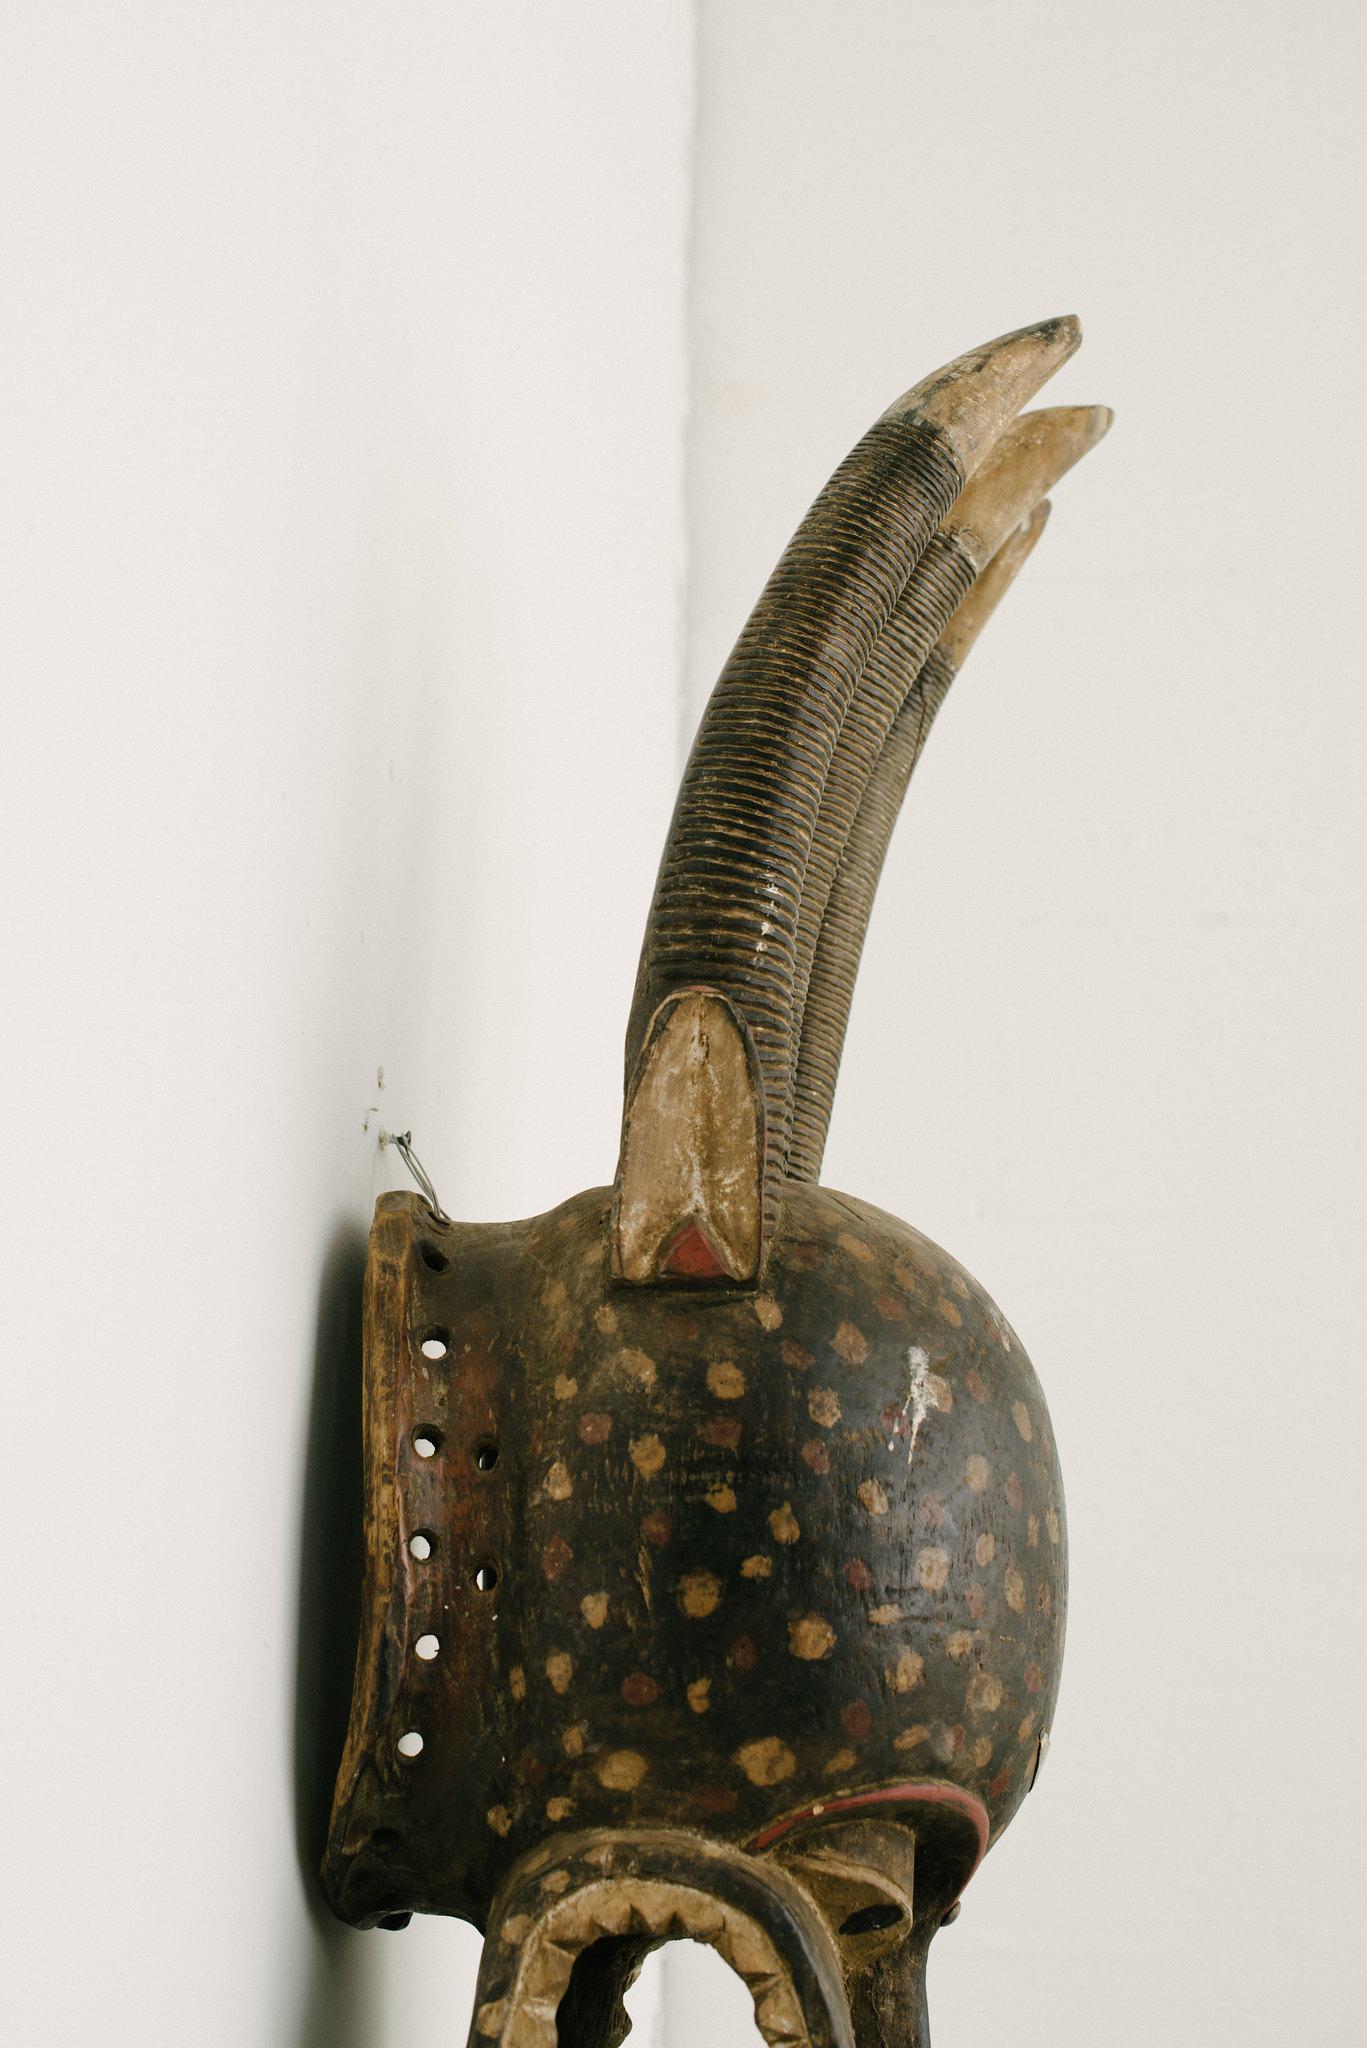 A 20th century carved and painted Senufo style mythical beast African mask. This decorative mask is whimsically painted with a spotted face, having three horns and a gaping mouth with carved teeth.